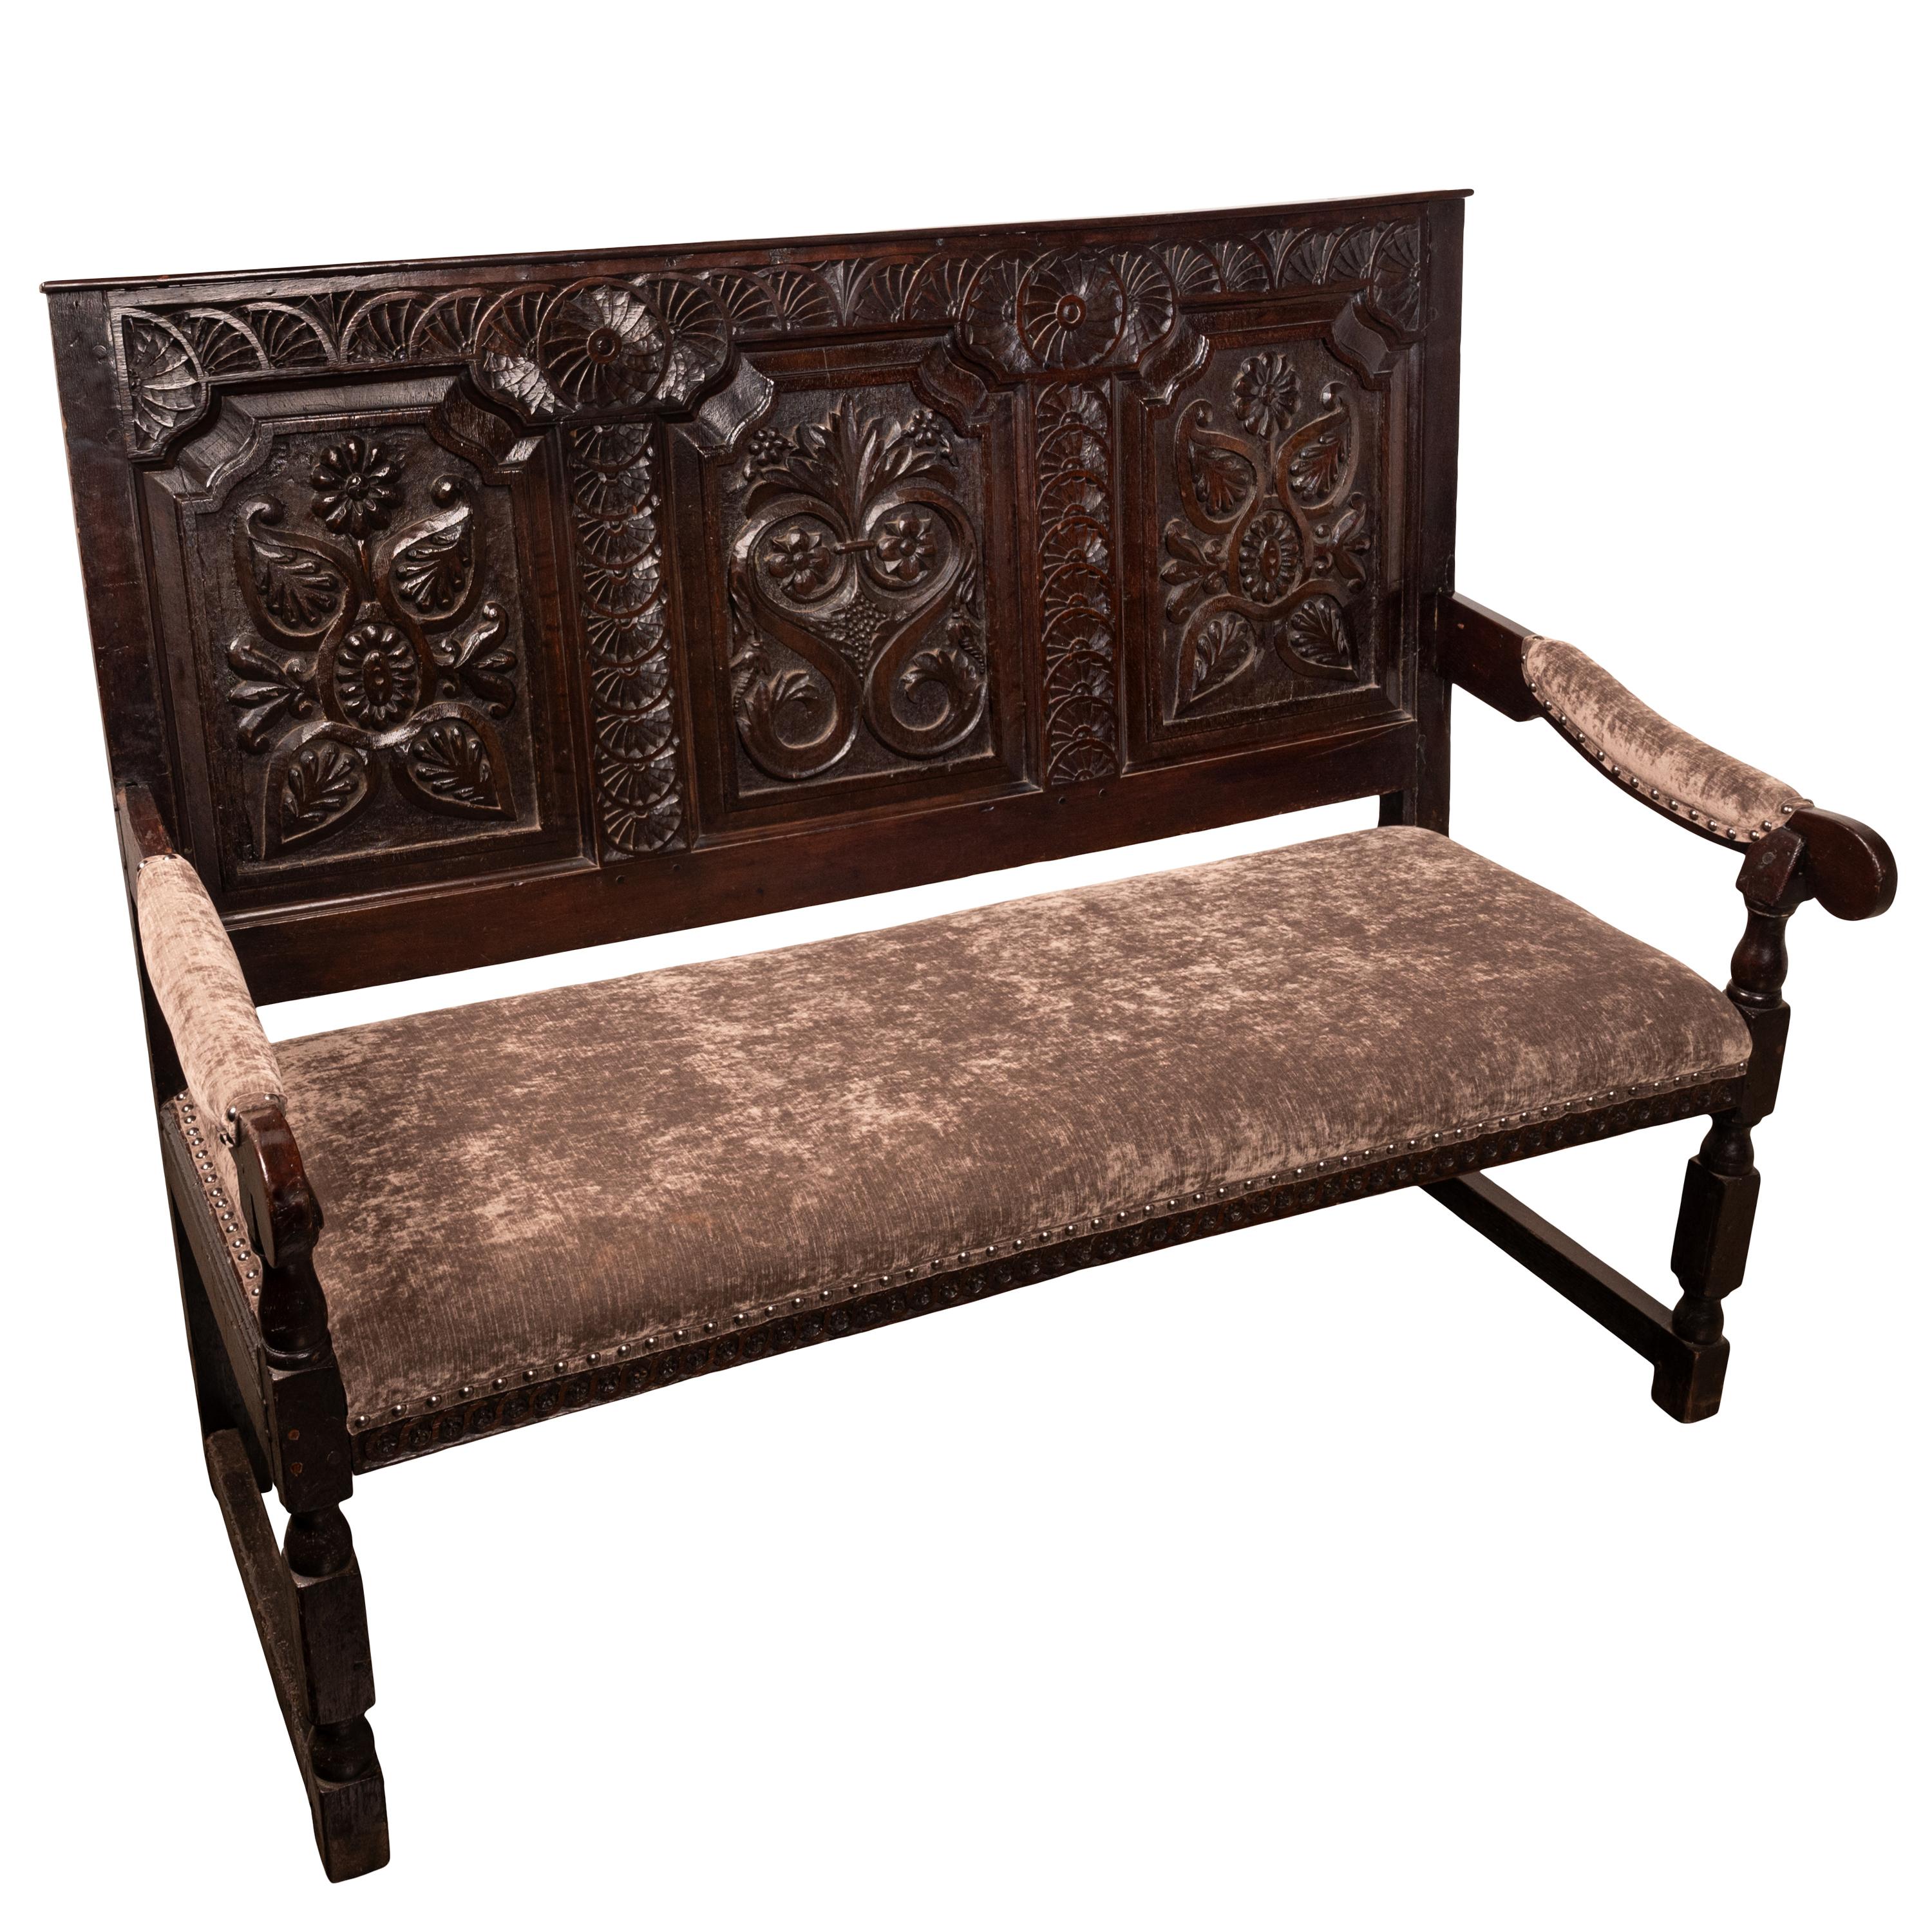 Antique English 17th Century King Charles II Carved Oak Settle Sofa Bench 1680 For Sale 3